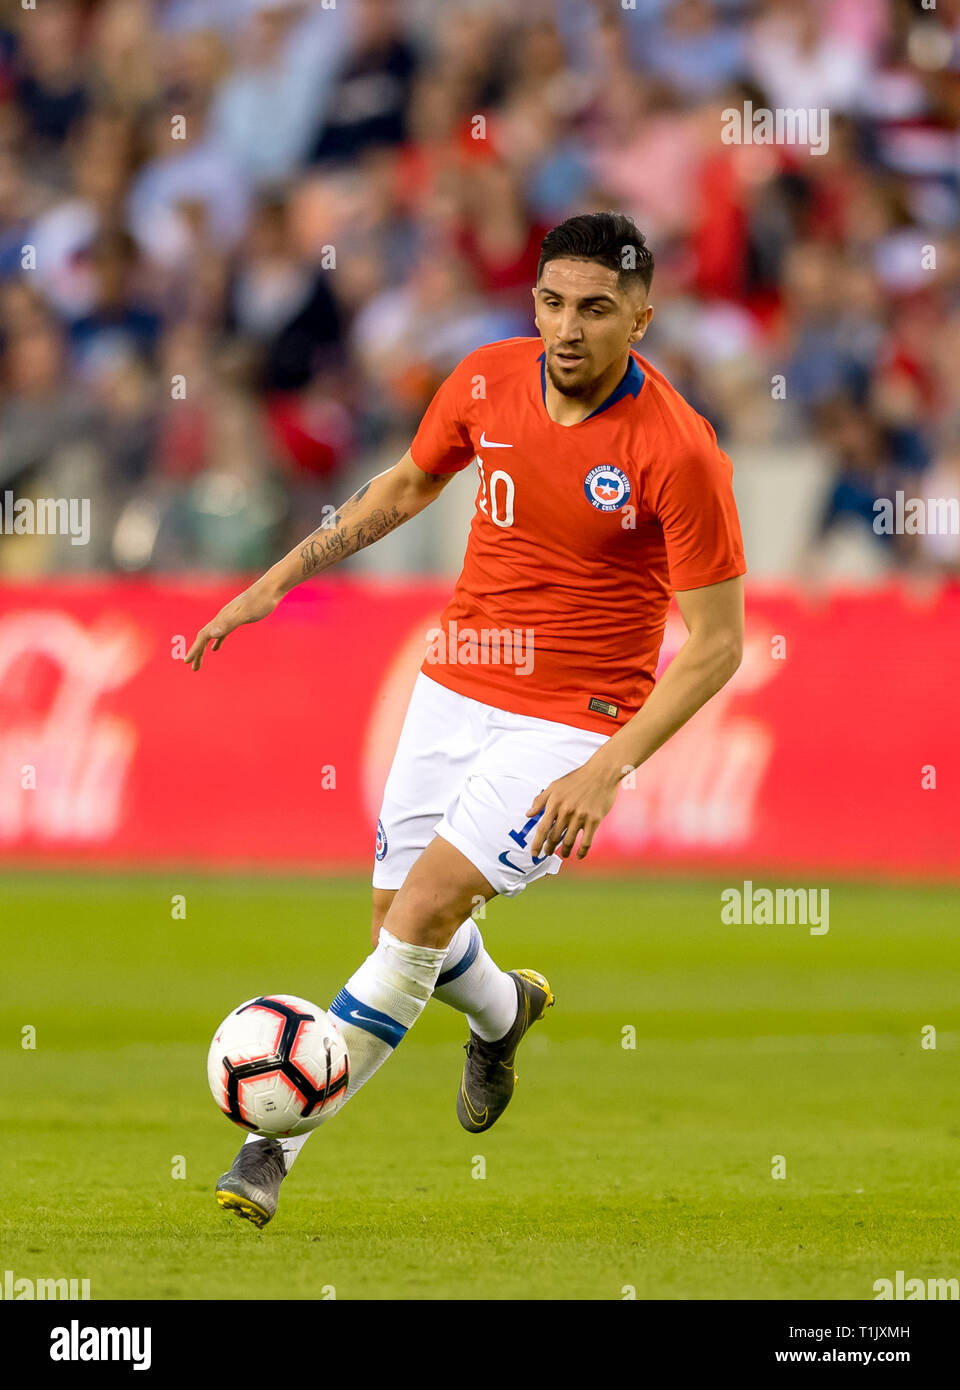 Houston, Texas, USA. 26th Mar 2019. Chile midfielder Diego ValdÅ½s (10) during an international friendly match between USA and Chile at BBVA Compass Stadium in Houston, Texas The score at the half 1-1 © Maria Lysaker/CSM. Credit: Cal Sport Media/Alamy Live News Stock Photo